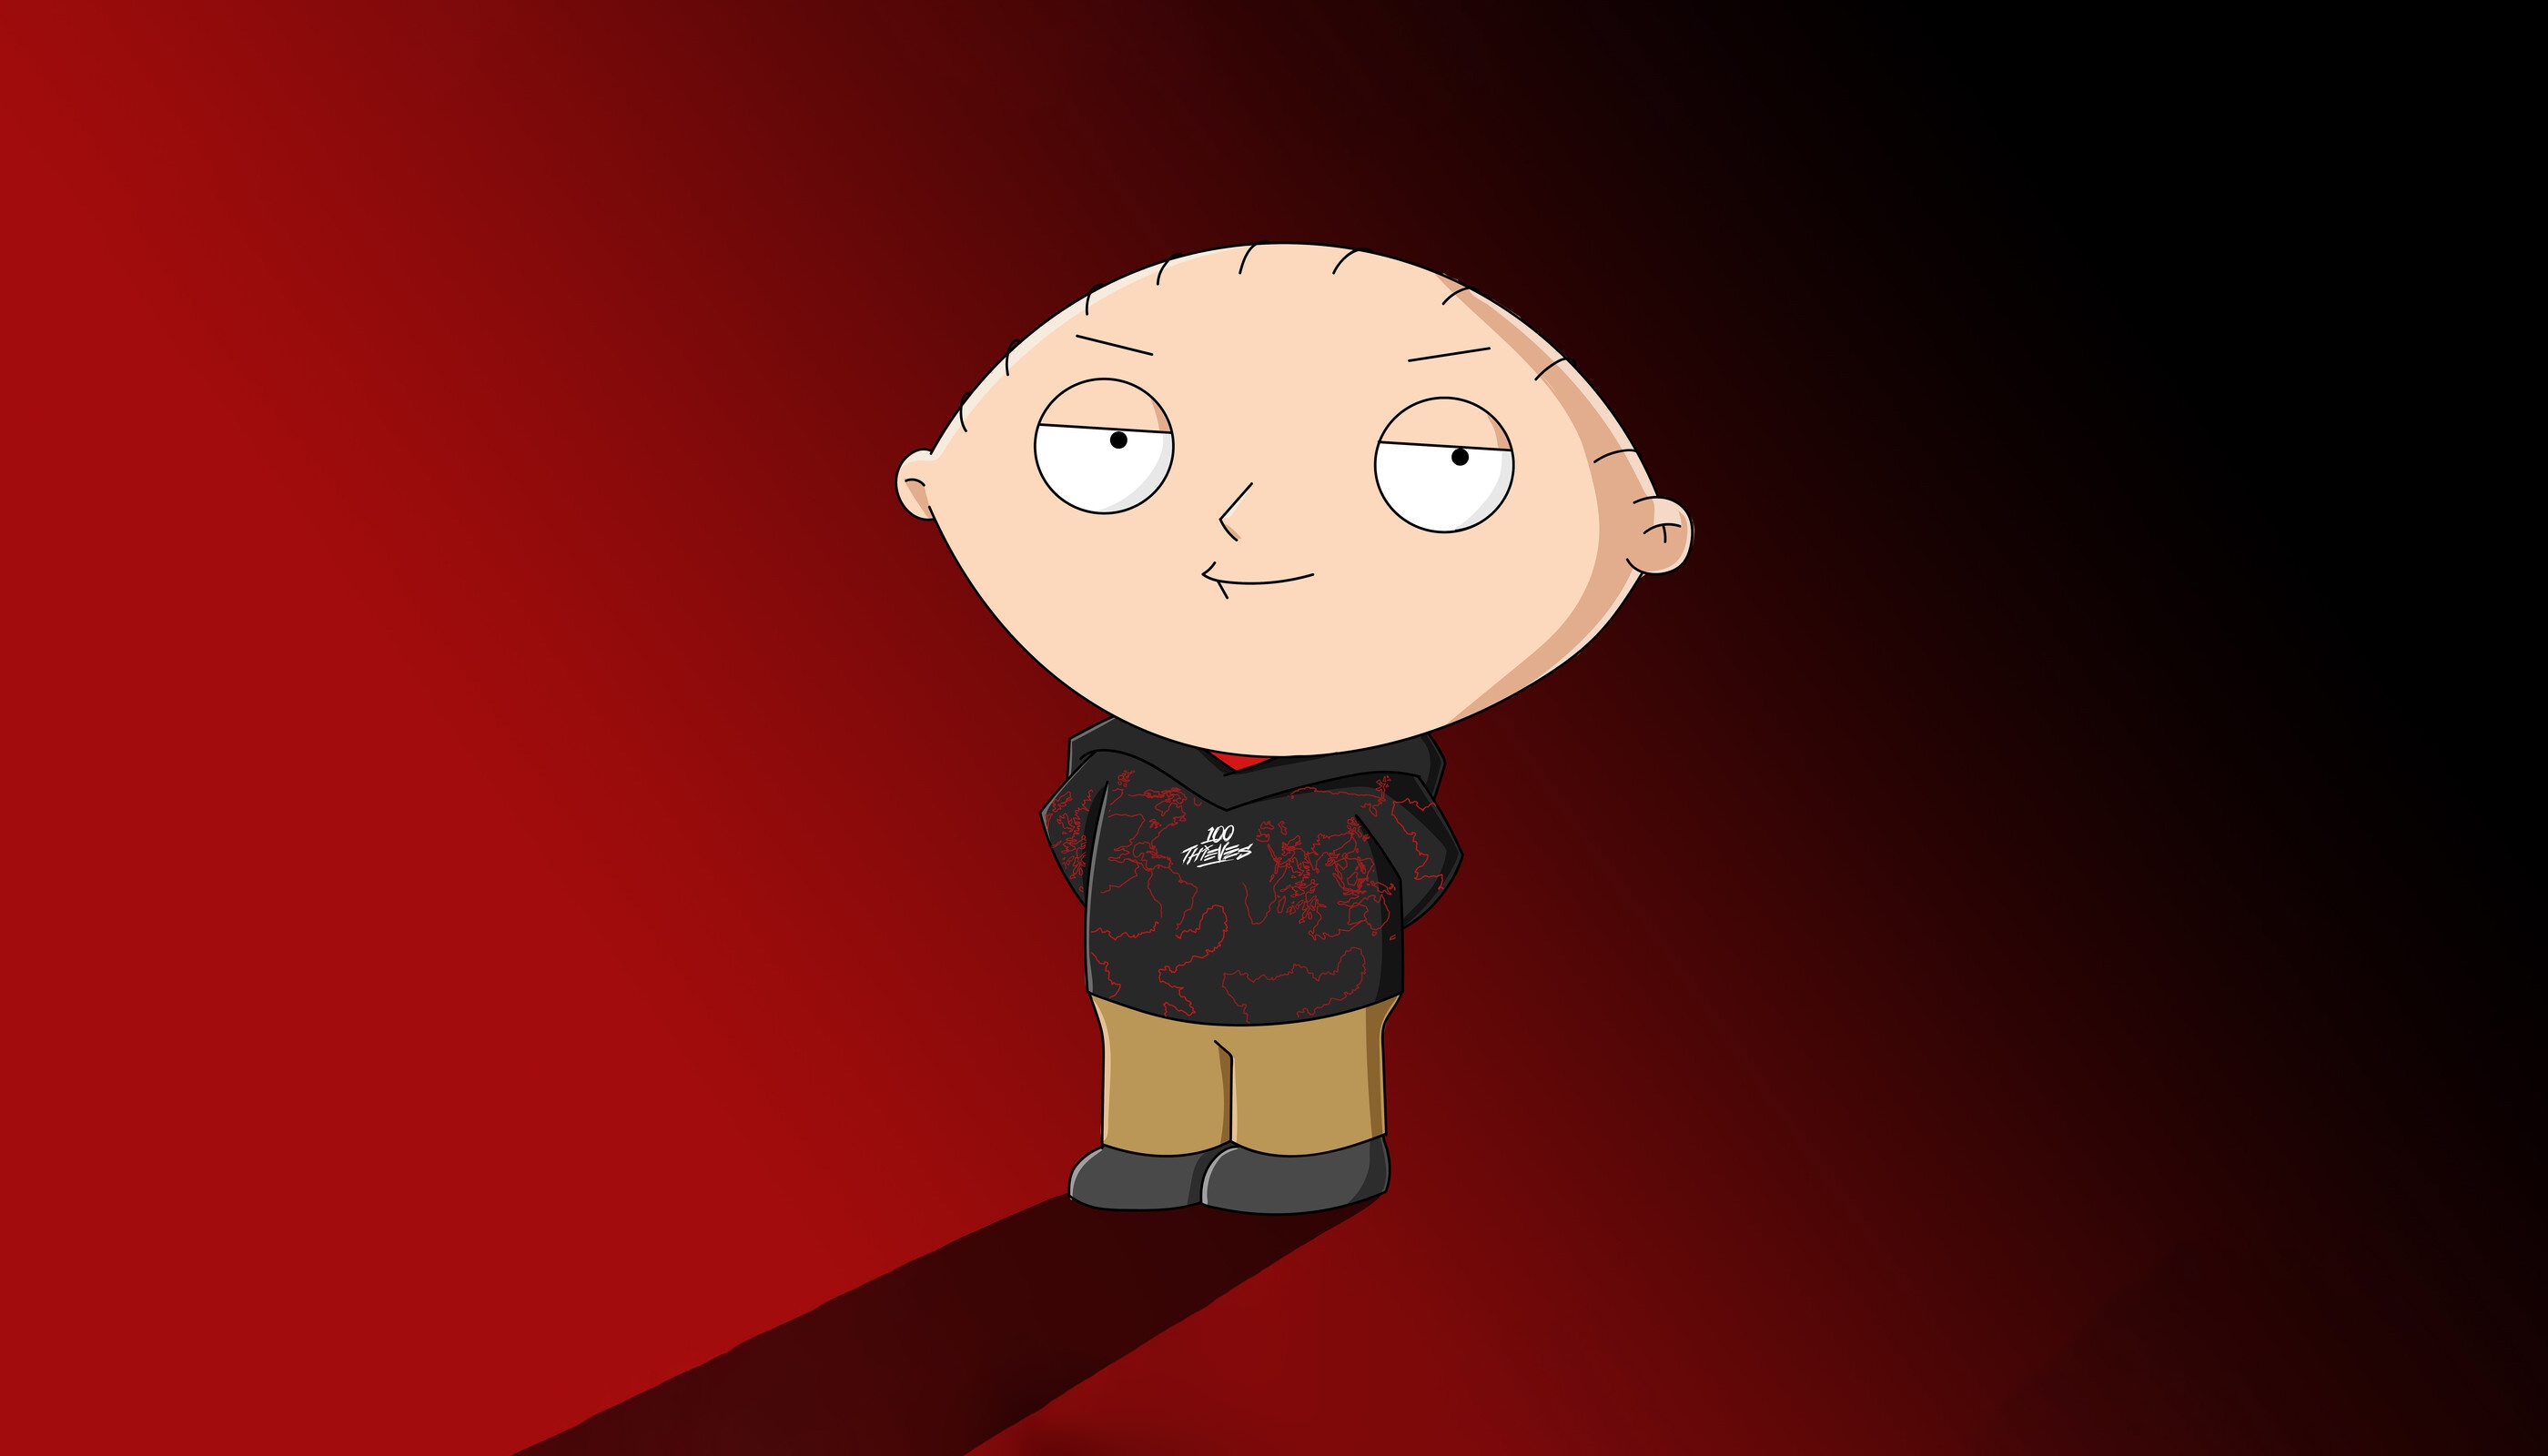 family guy, tv show, stewie griffin